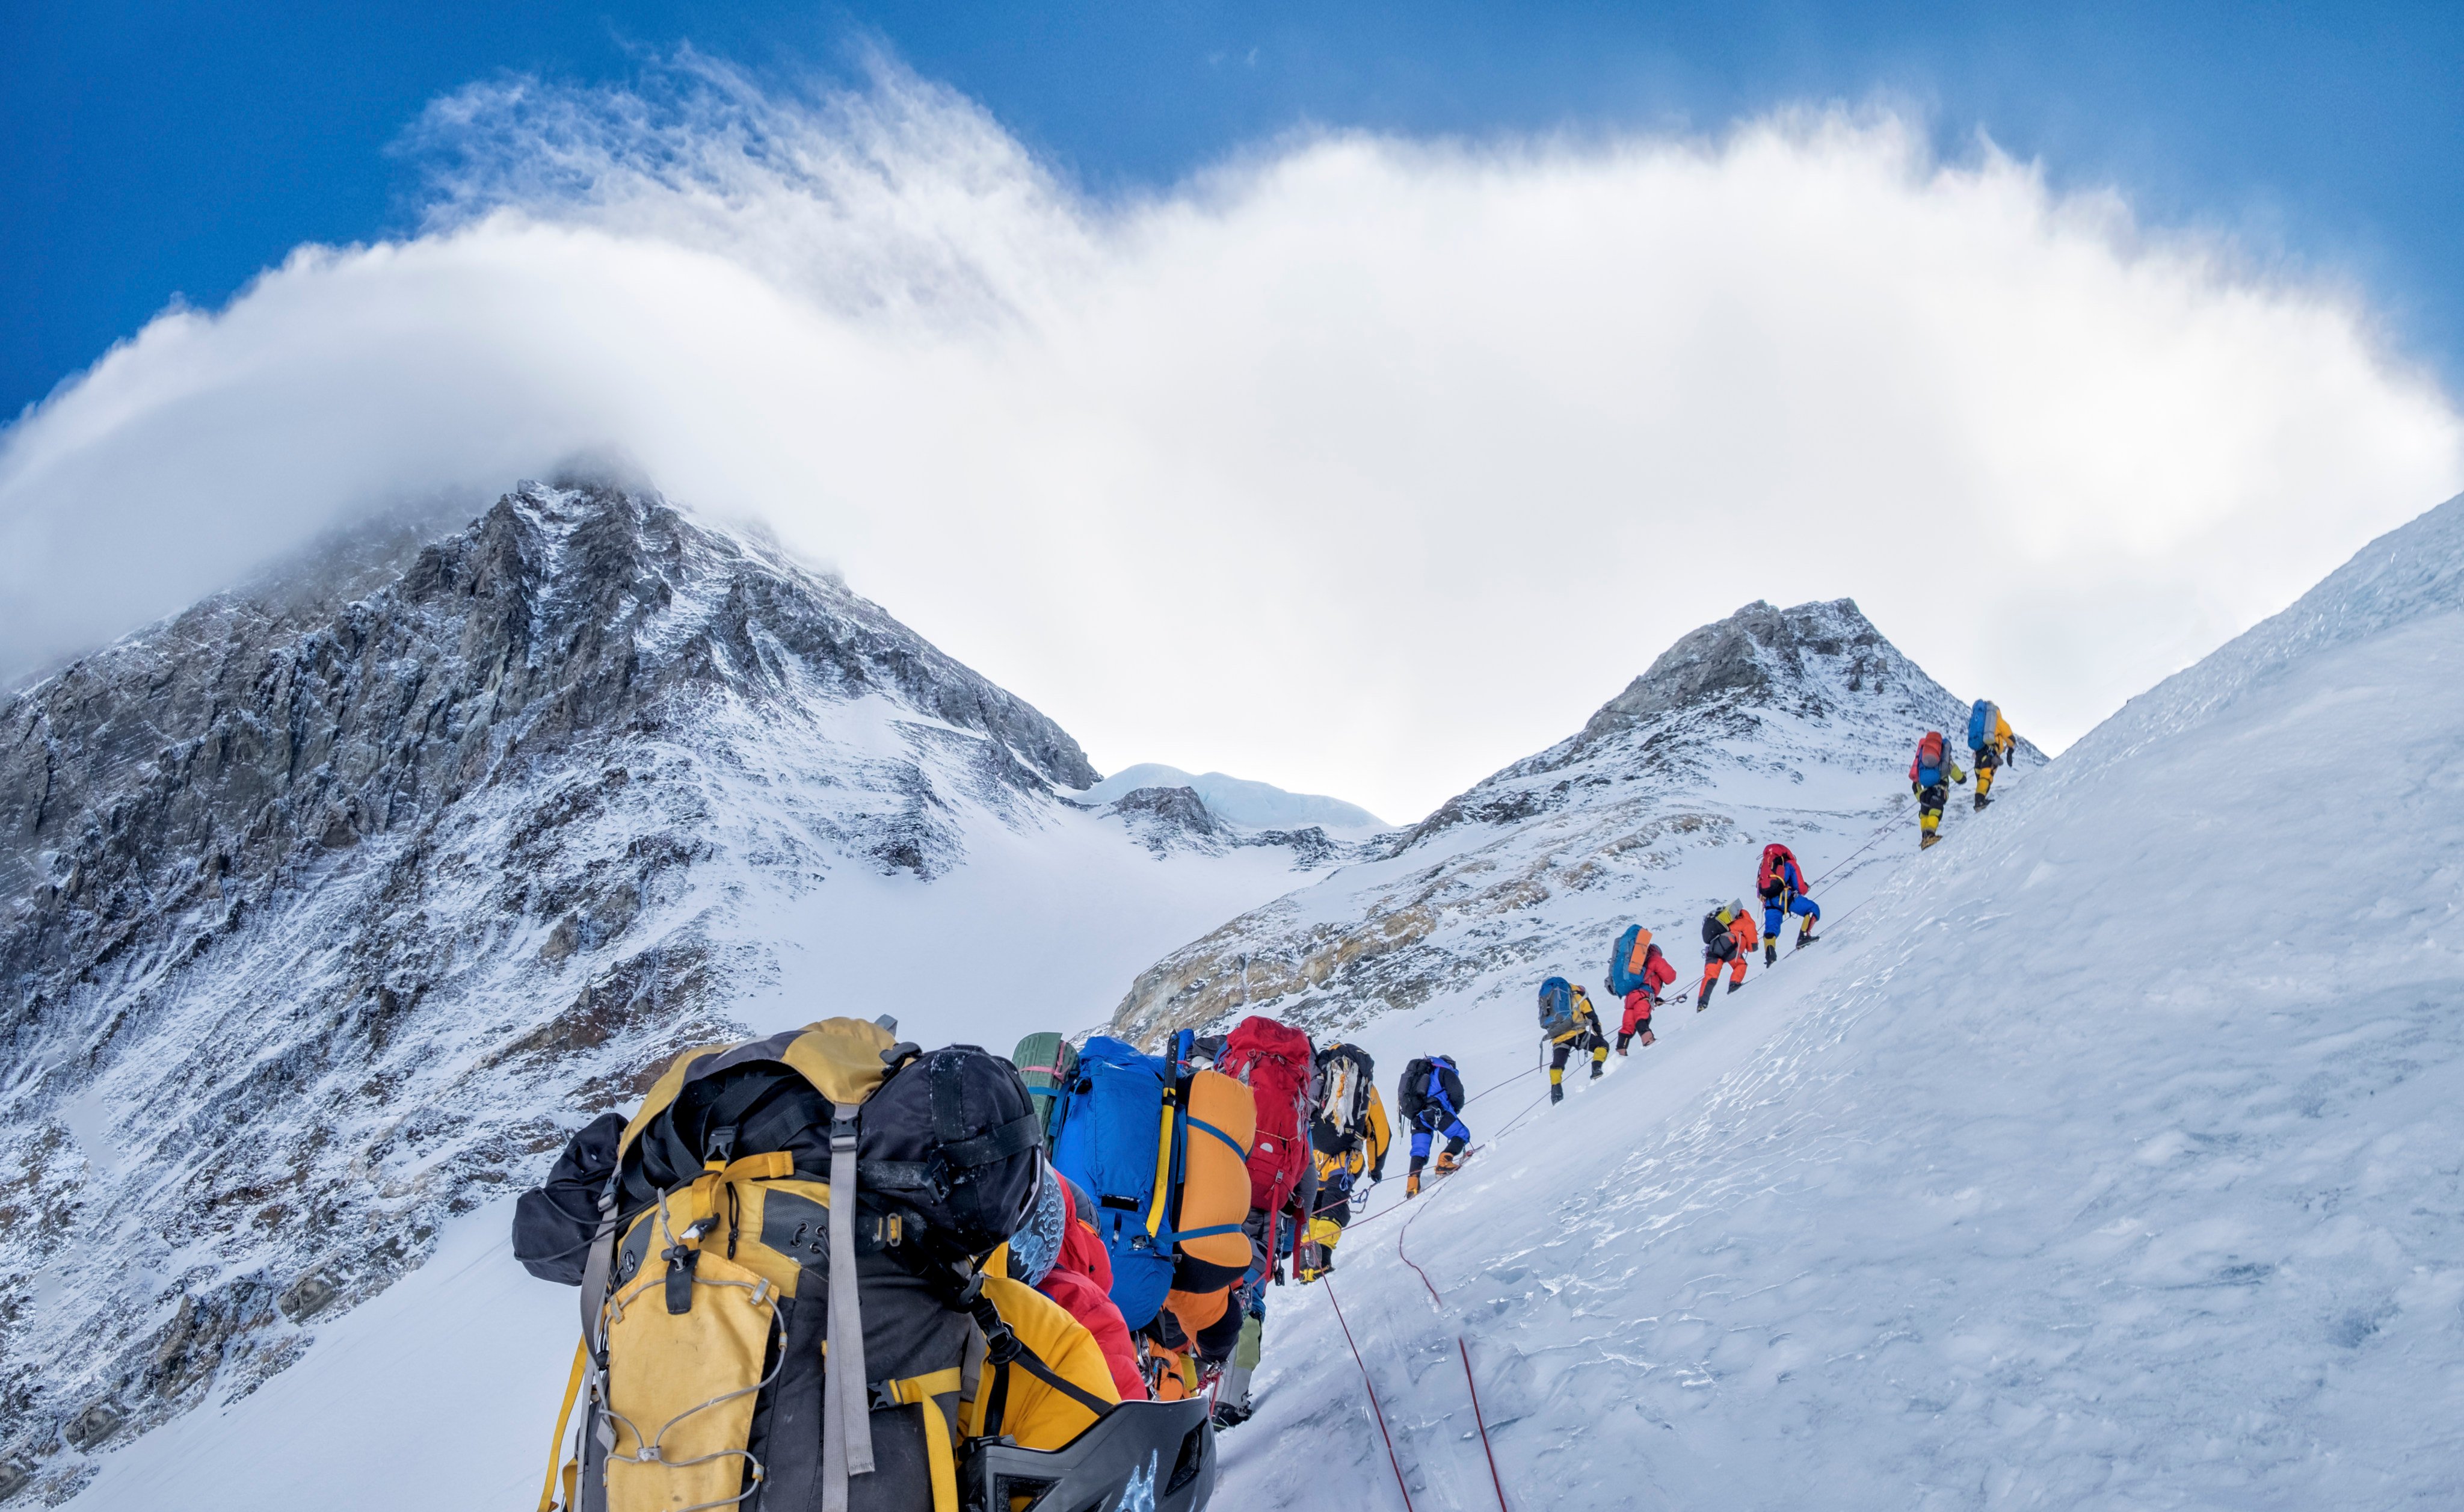 Roped team ascending Everest. Photo: Getty Images